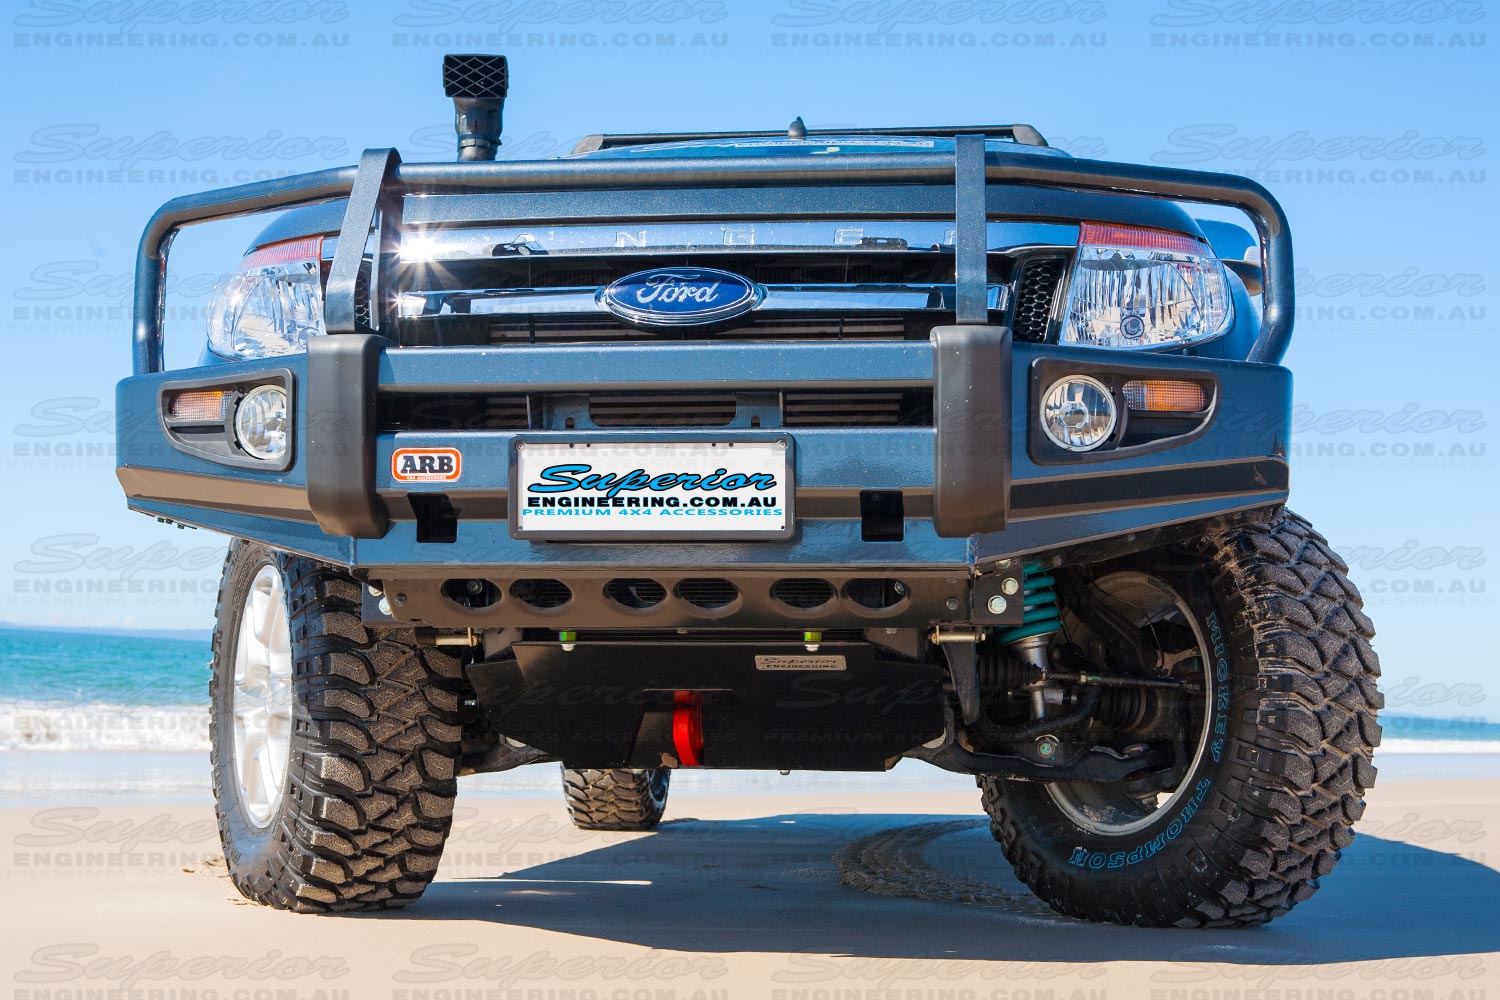 Front view of the Ford Ranger Bash Plate and Recovery Point